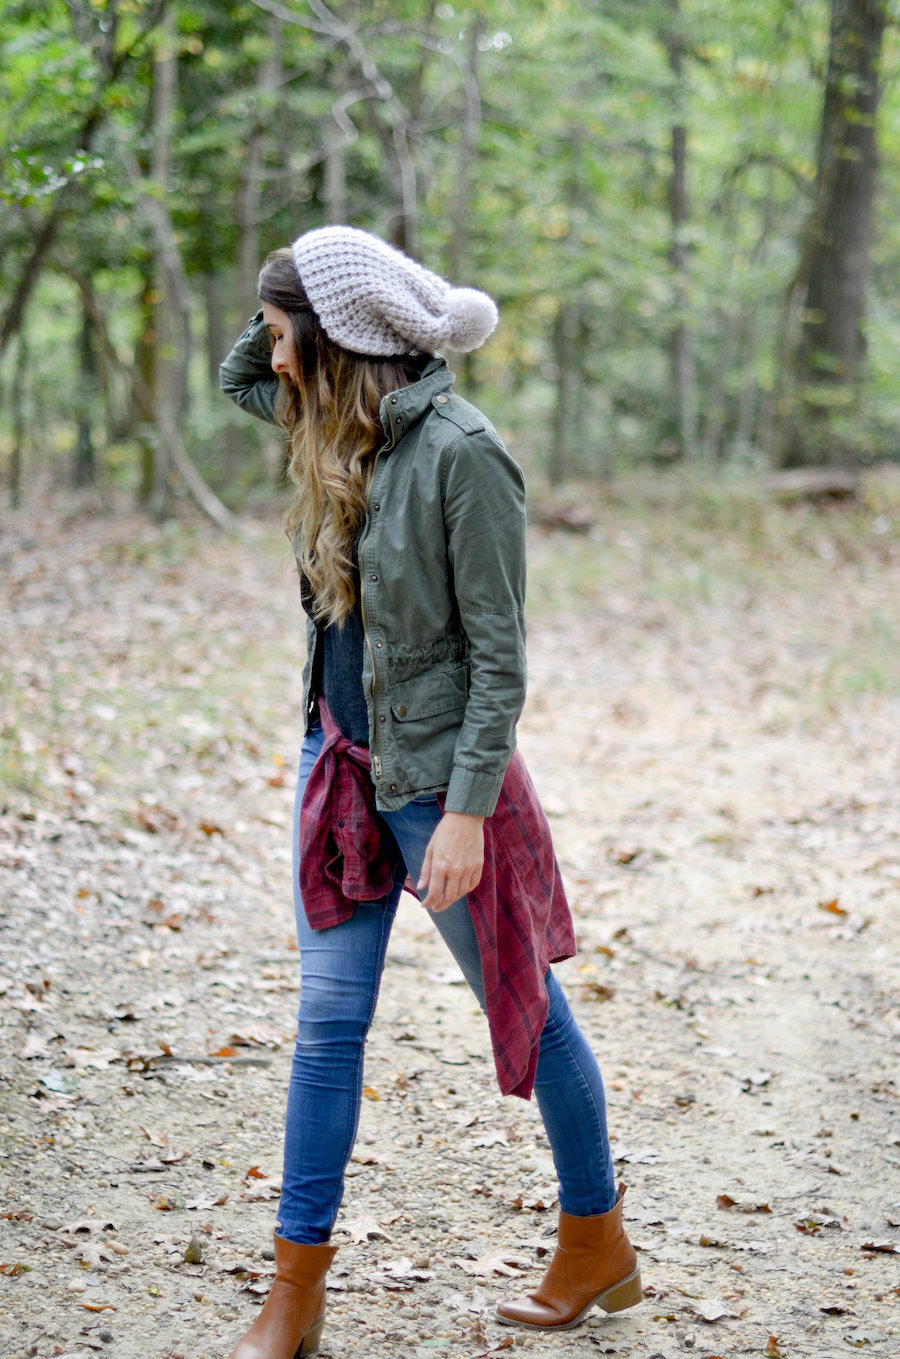 Girl in Fall Outfit in Woods